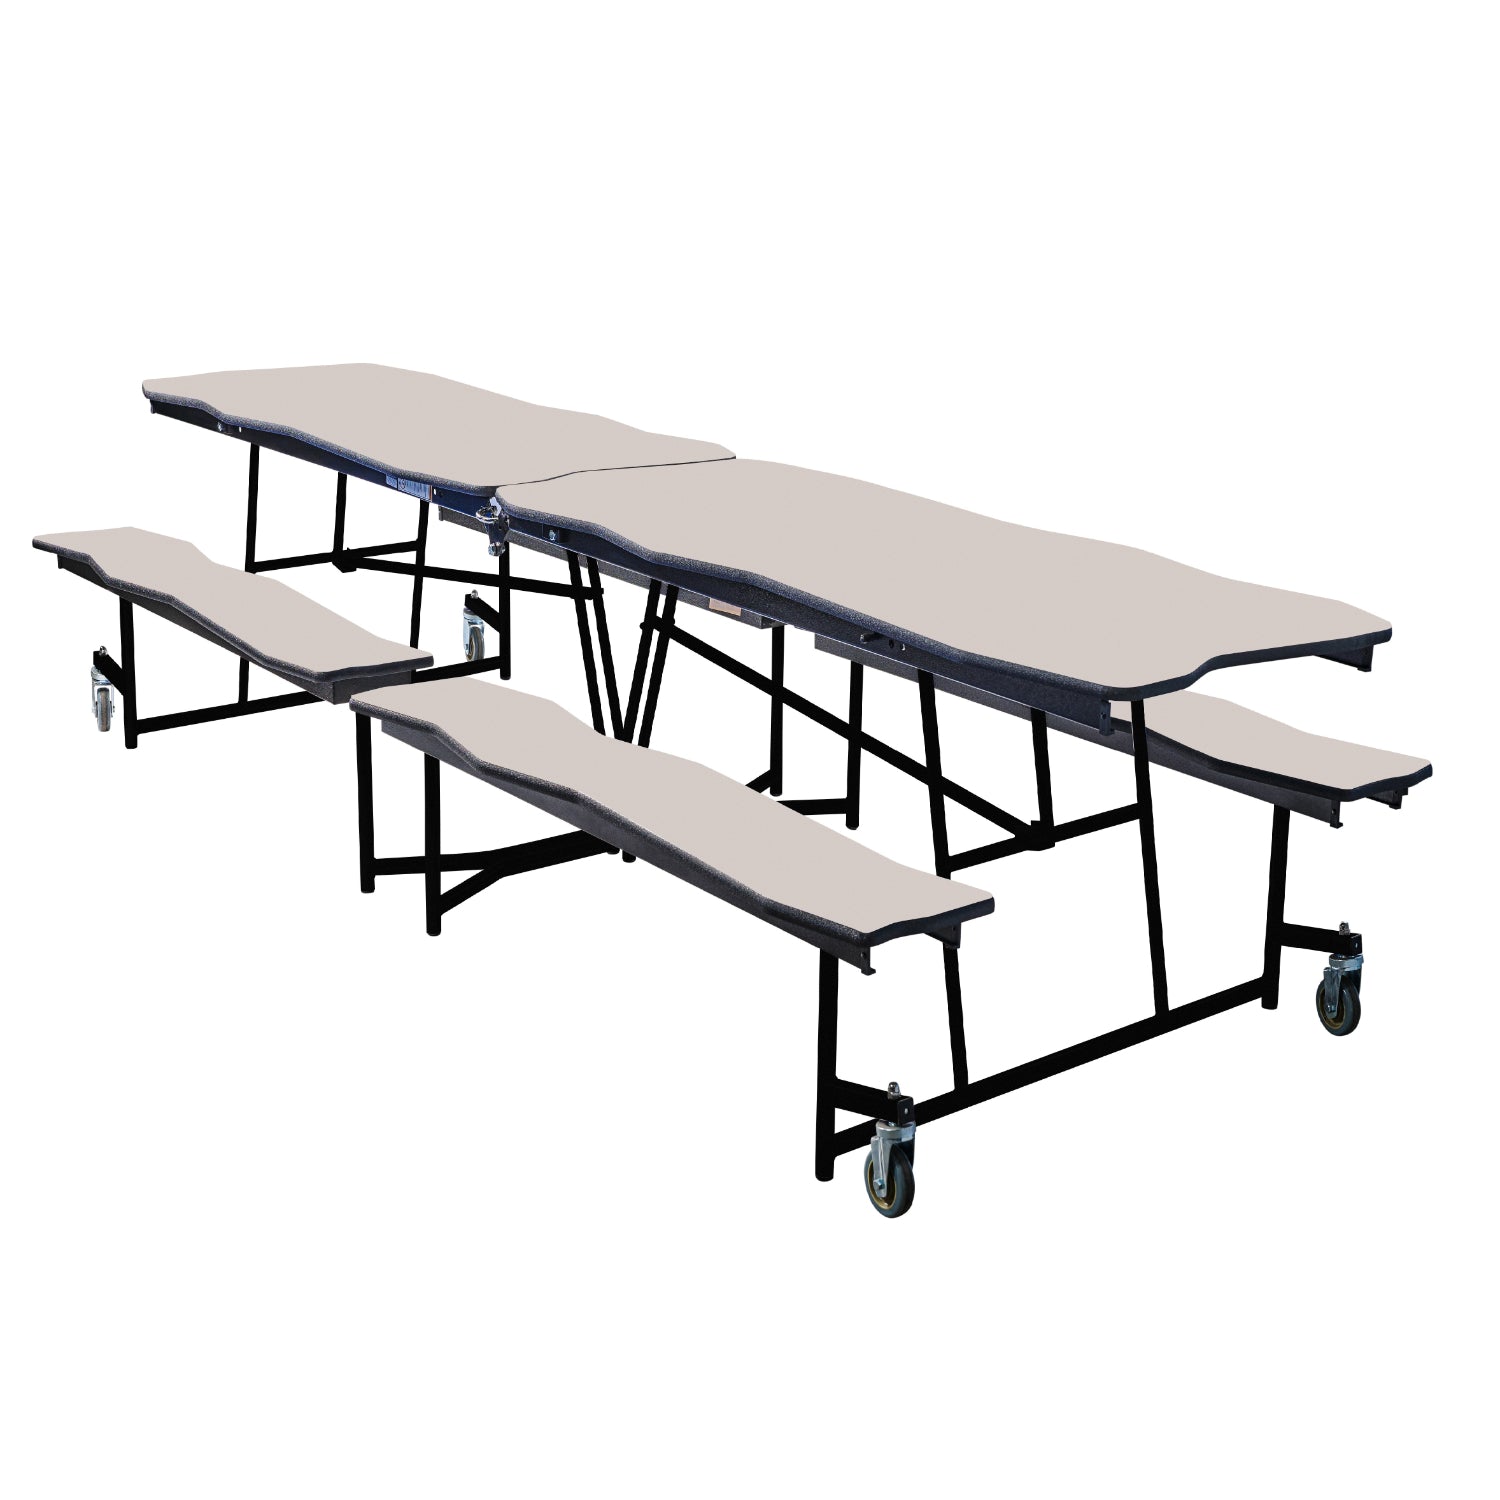 Mobile Cafeteria Table with Benches, 8' Bedrock, MDF Core, Black ProtectEdge, Textured Black Frame